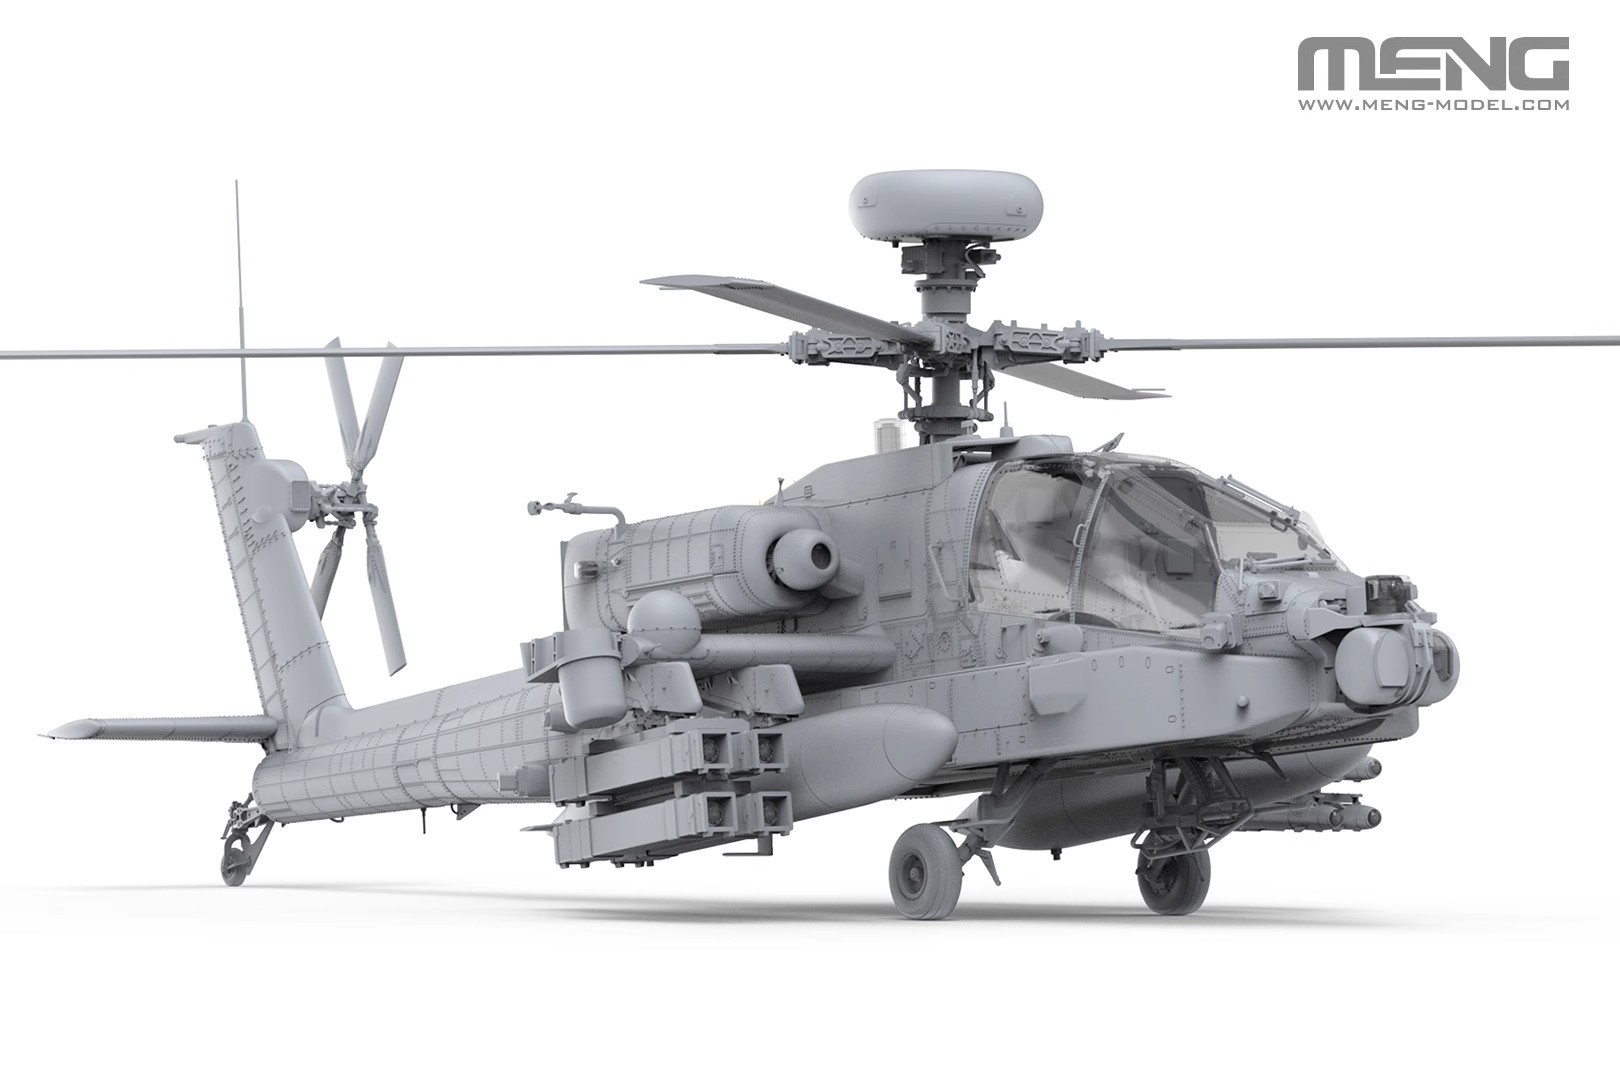 1/35 IAF AH-64D Saraf Heavy Attack Helicopter with Resin Figures - Click Image to Close